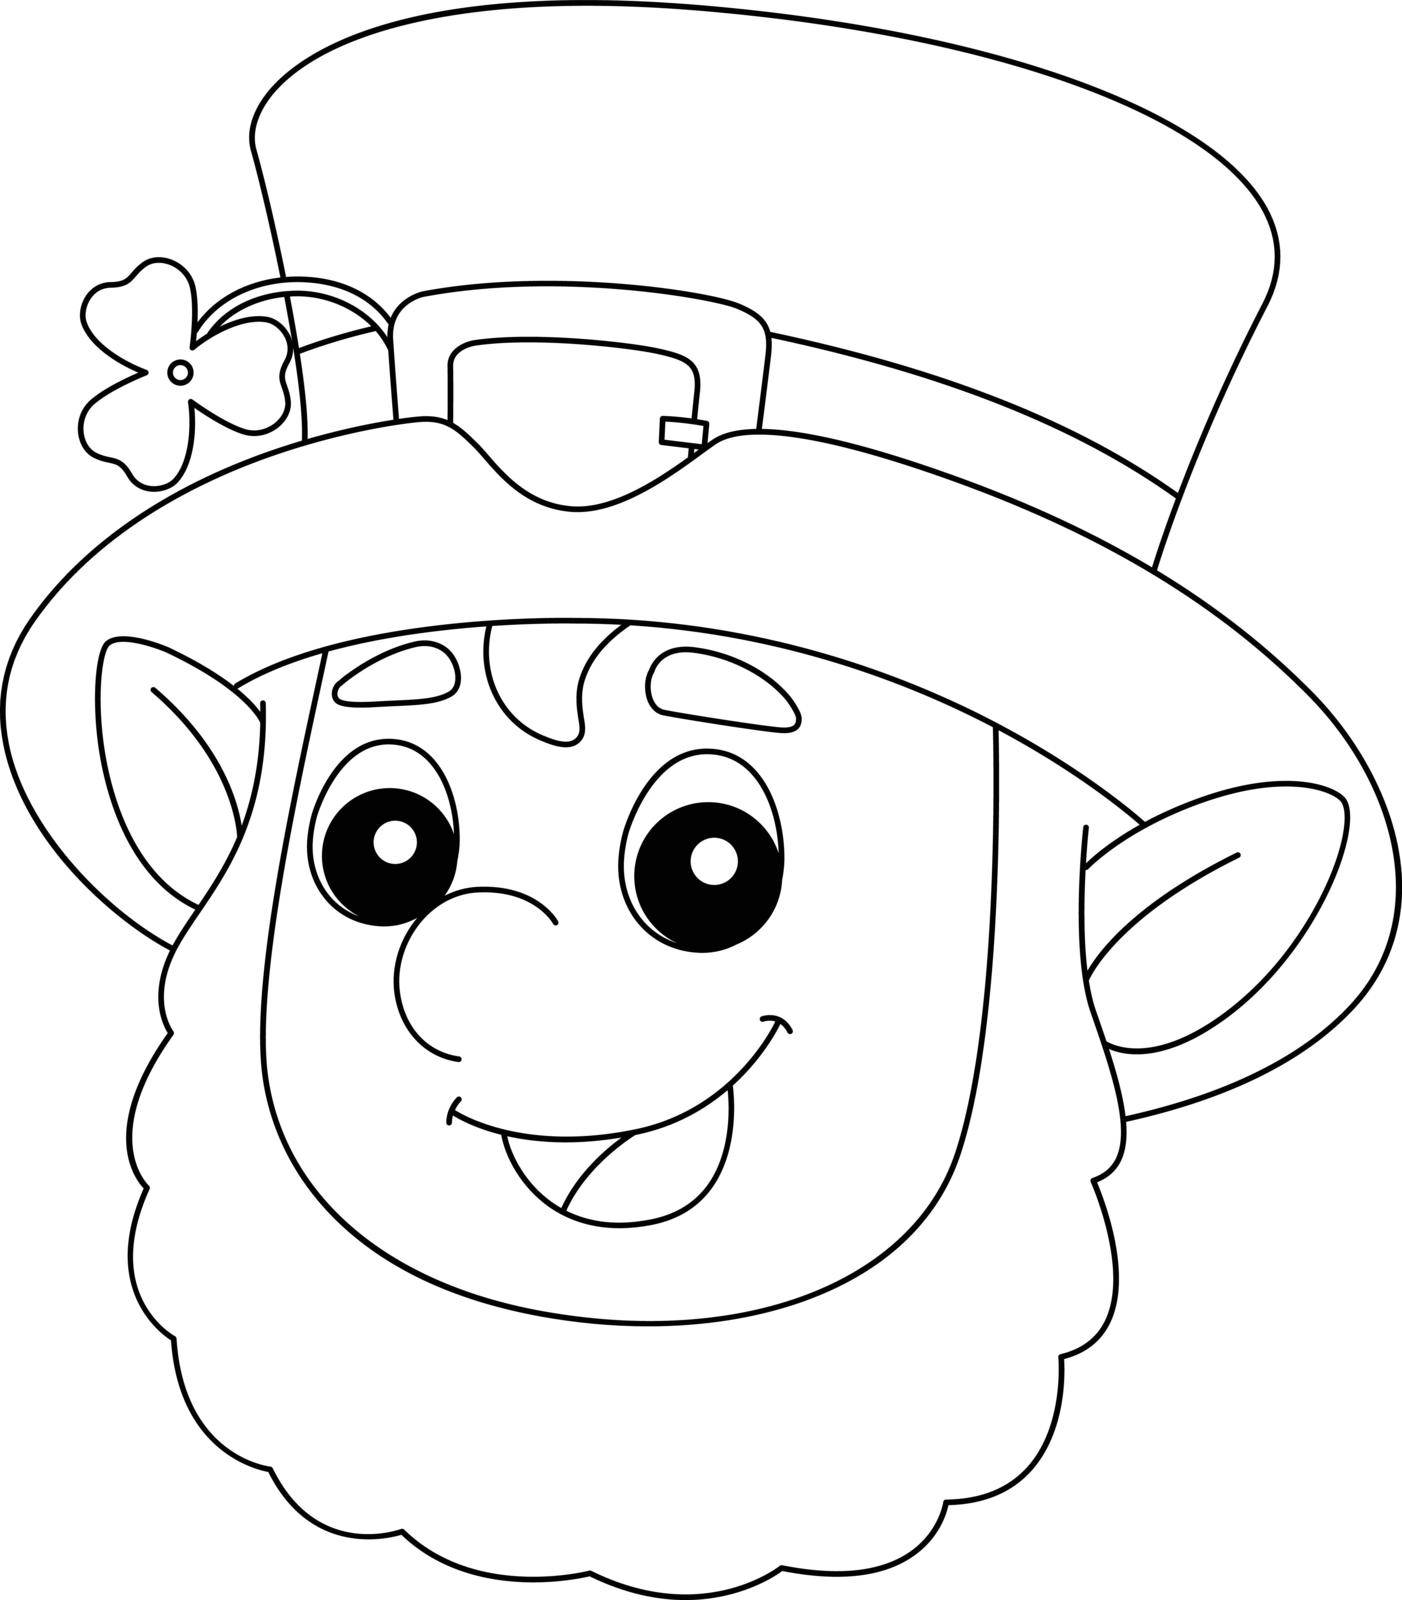 A cute and funny coloring page of a St. Patricks Day leprechaun head. Provides hours of coloring fun for children. To color, this page is very easy. Suitable for little kids and toddlers.